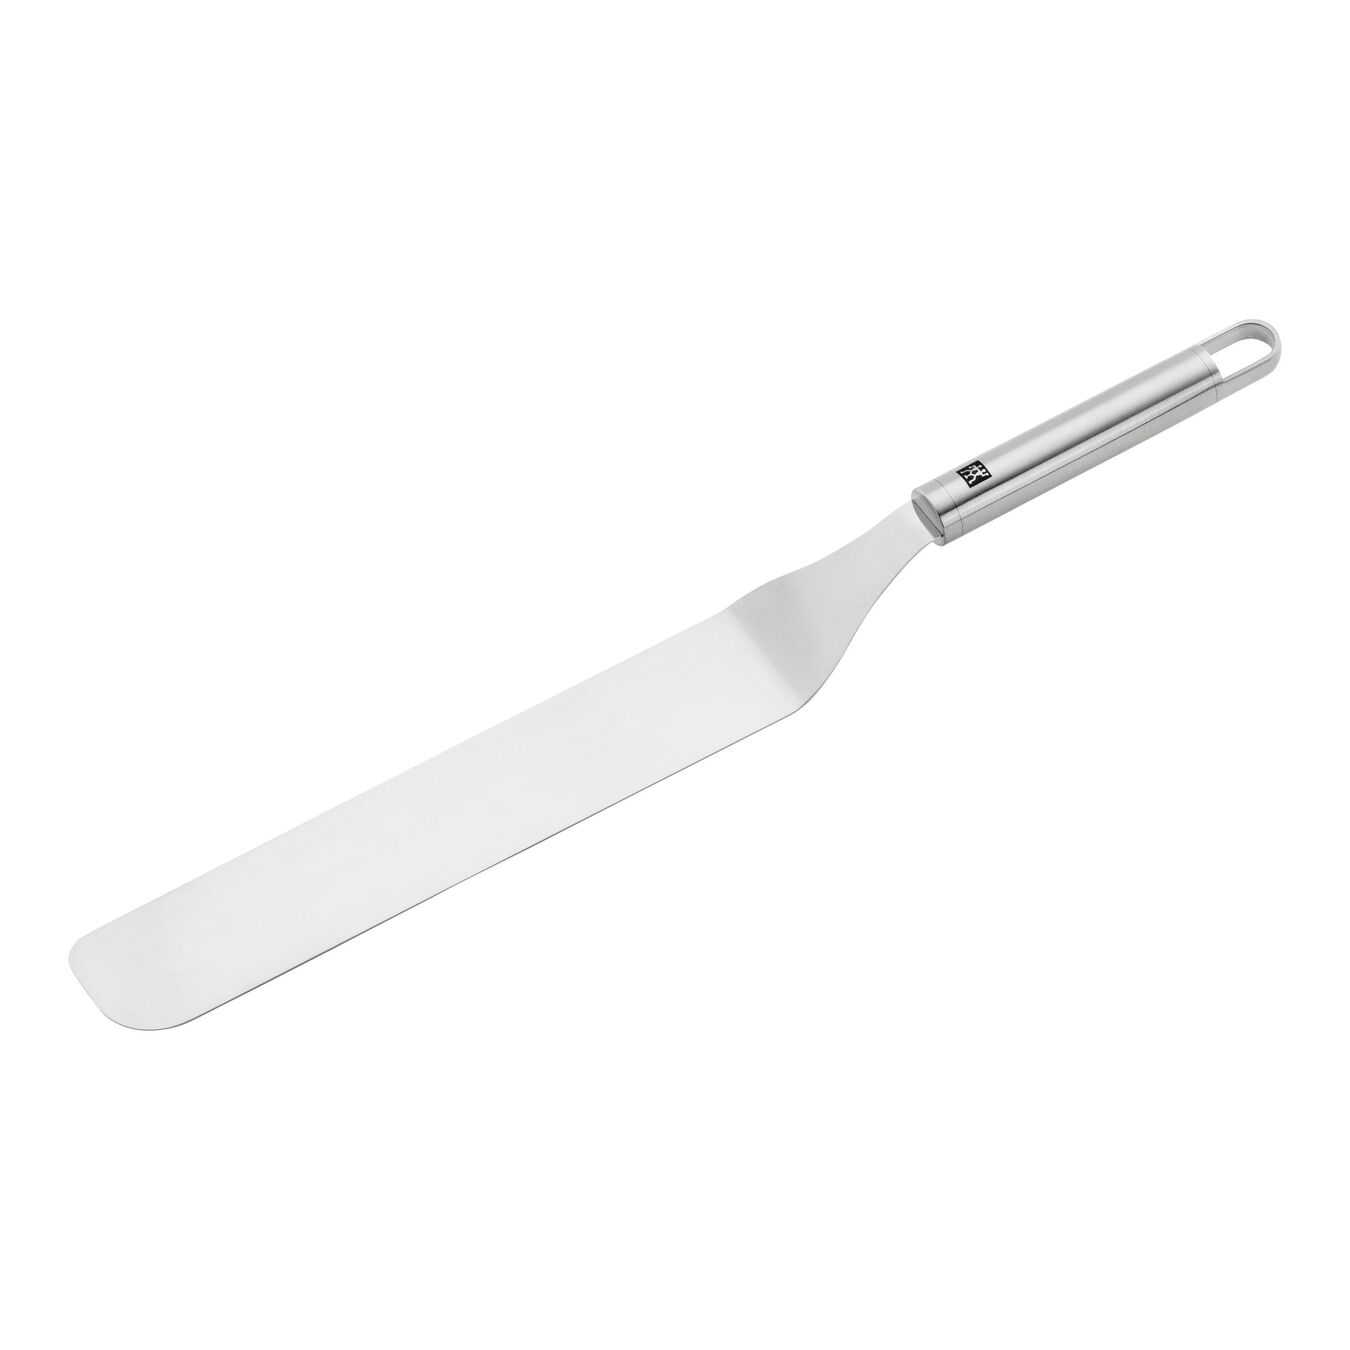 16-inch Long Spatula - Angled, 18/10 Stainless Steel ,,large 1